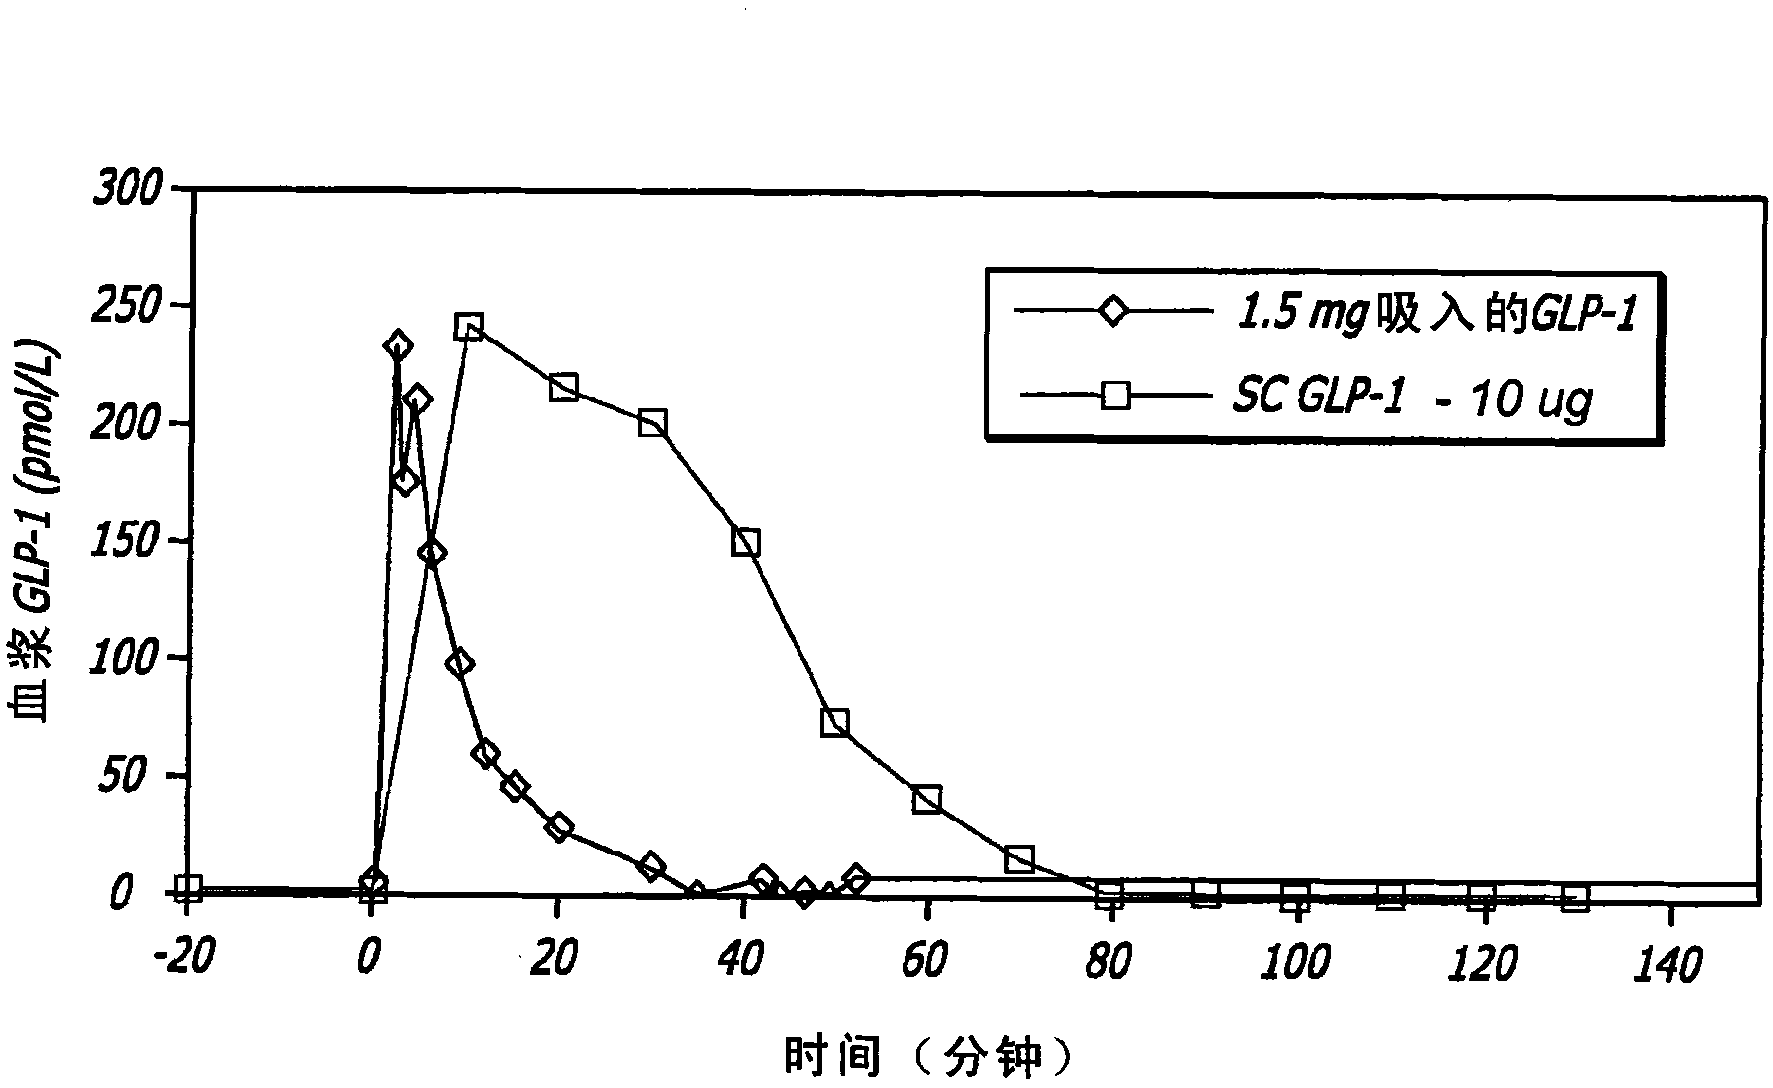 Method of preventing adverse effects by glp-1